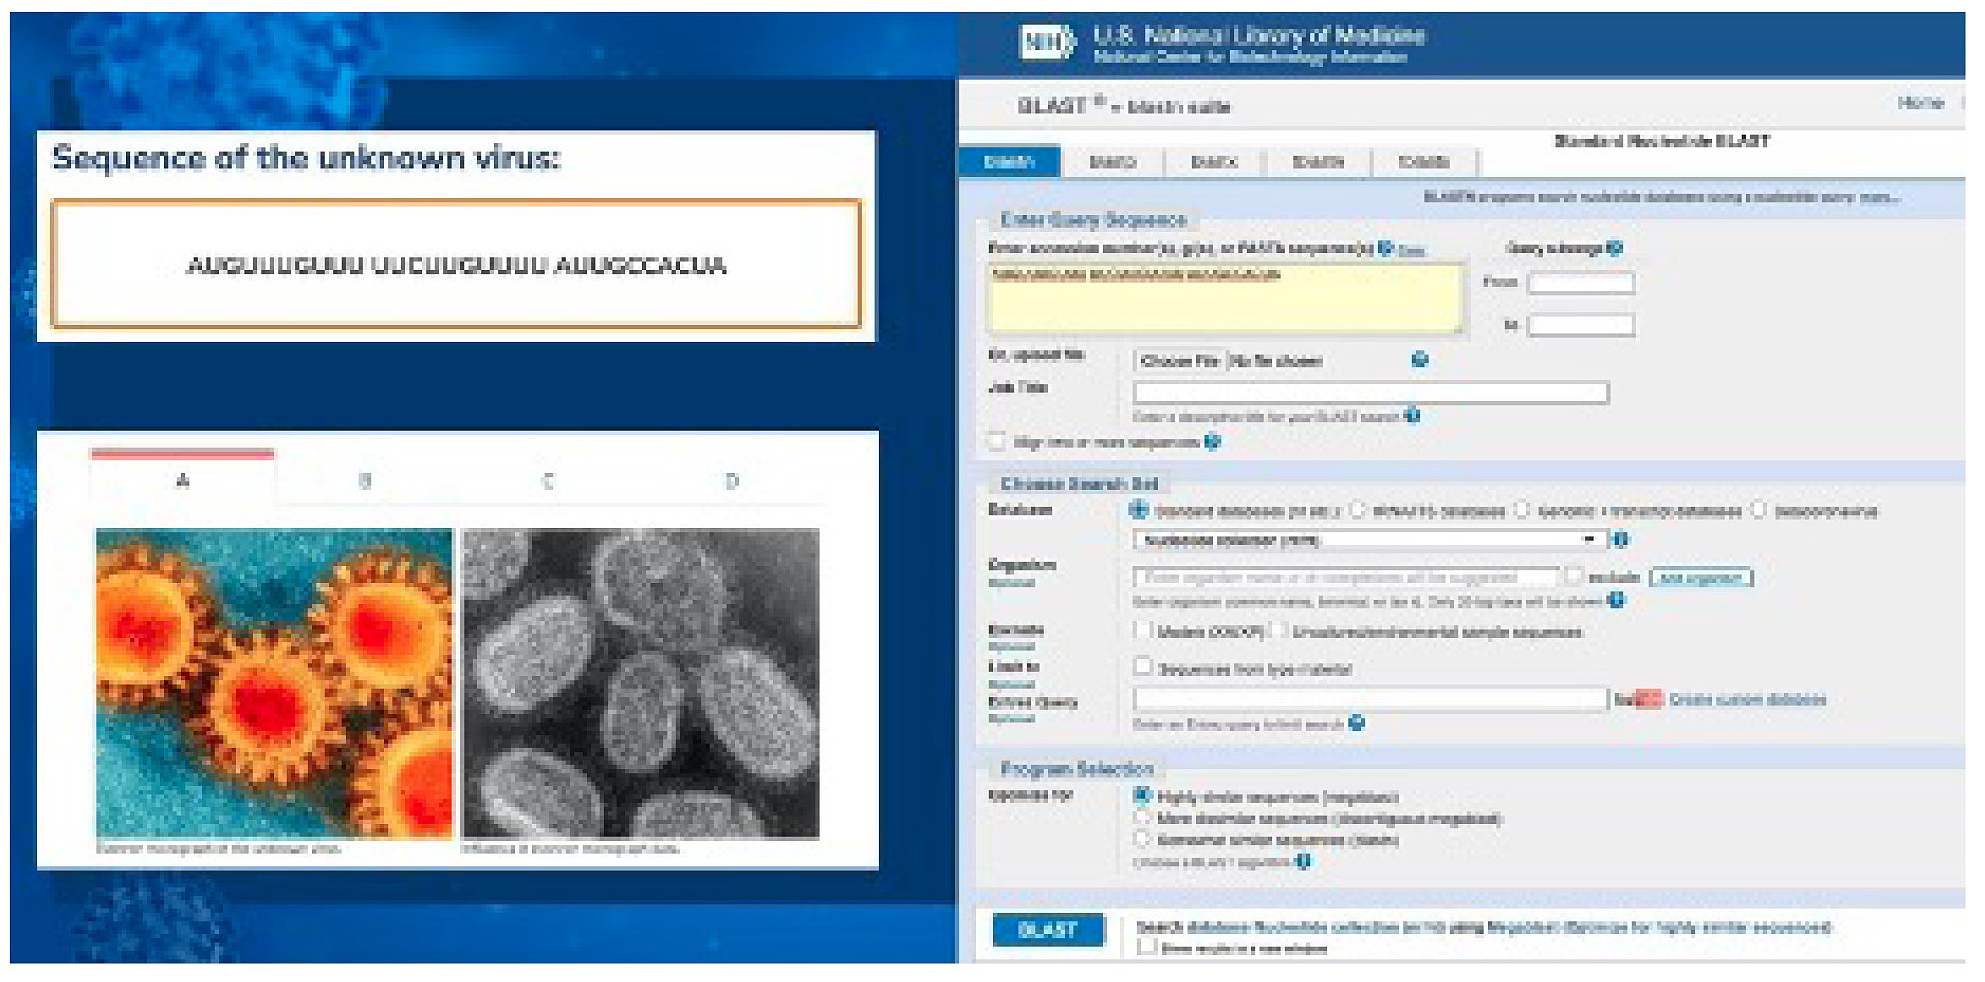 Figure 2 On the left is a comparison of electron micrographs of the novel virus and a known one. On the right is the BLAST tool for investigating the homology of novel sequences to ones already characterized in the database.